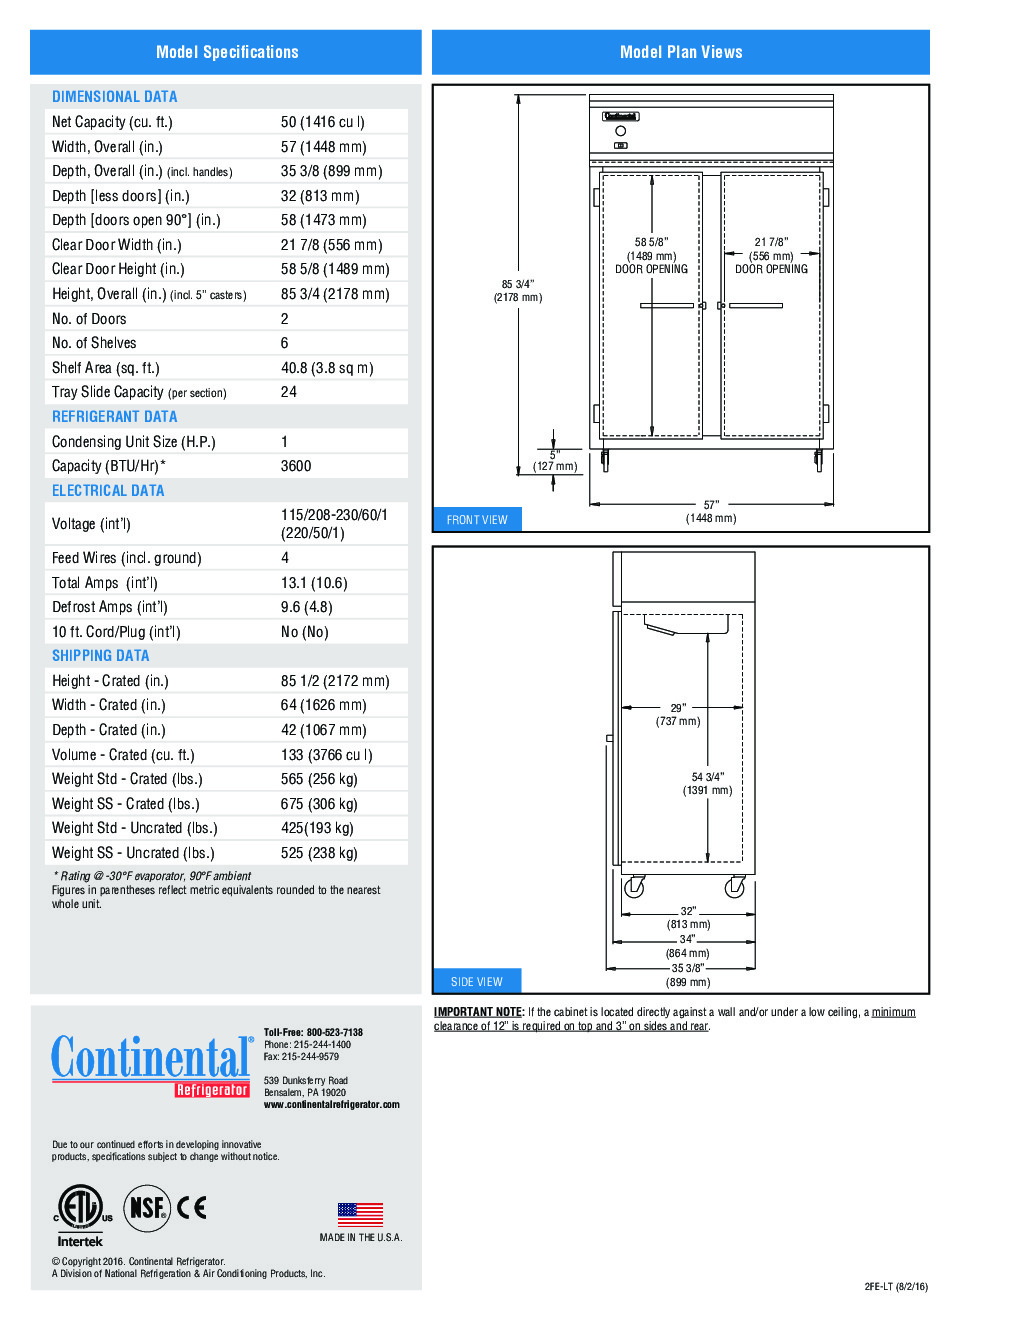 Continental Refrigerator 2FE-LT-SS Reach-In Low Temperature Freezer